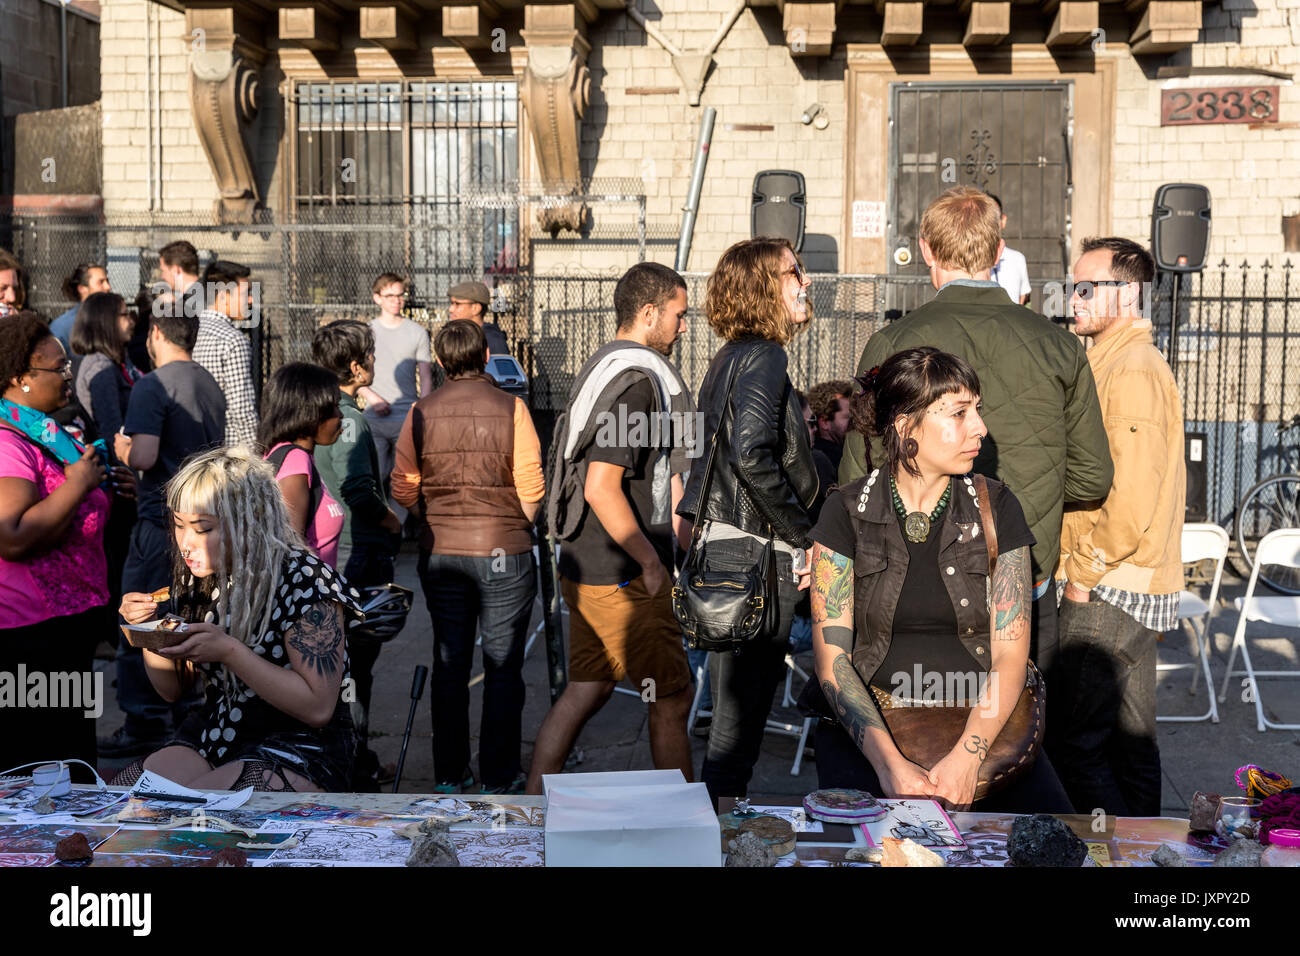 OAKLAND, CALIFORNIA-June 6, 2014:The people scene at the Oakland Art Murmur First Friday street festival on Telegraph Avenue in the Uptown district. Stock Photo